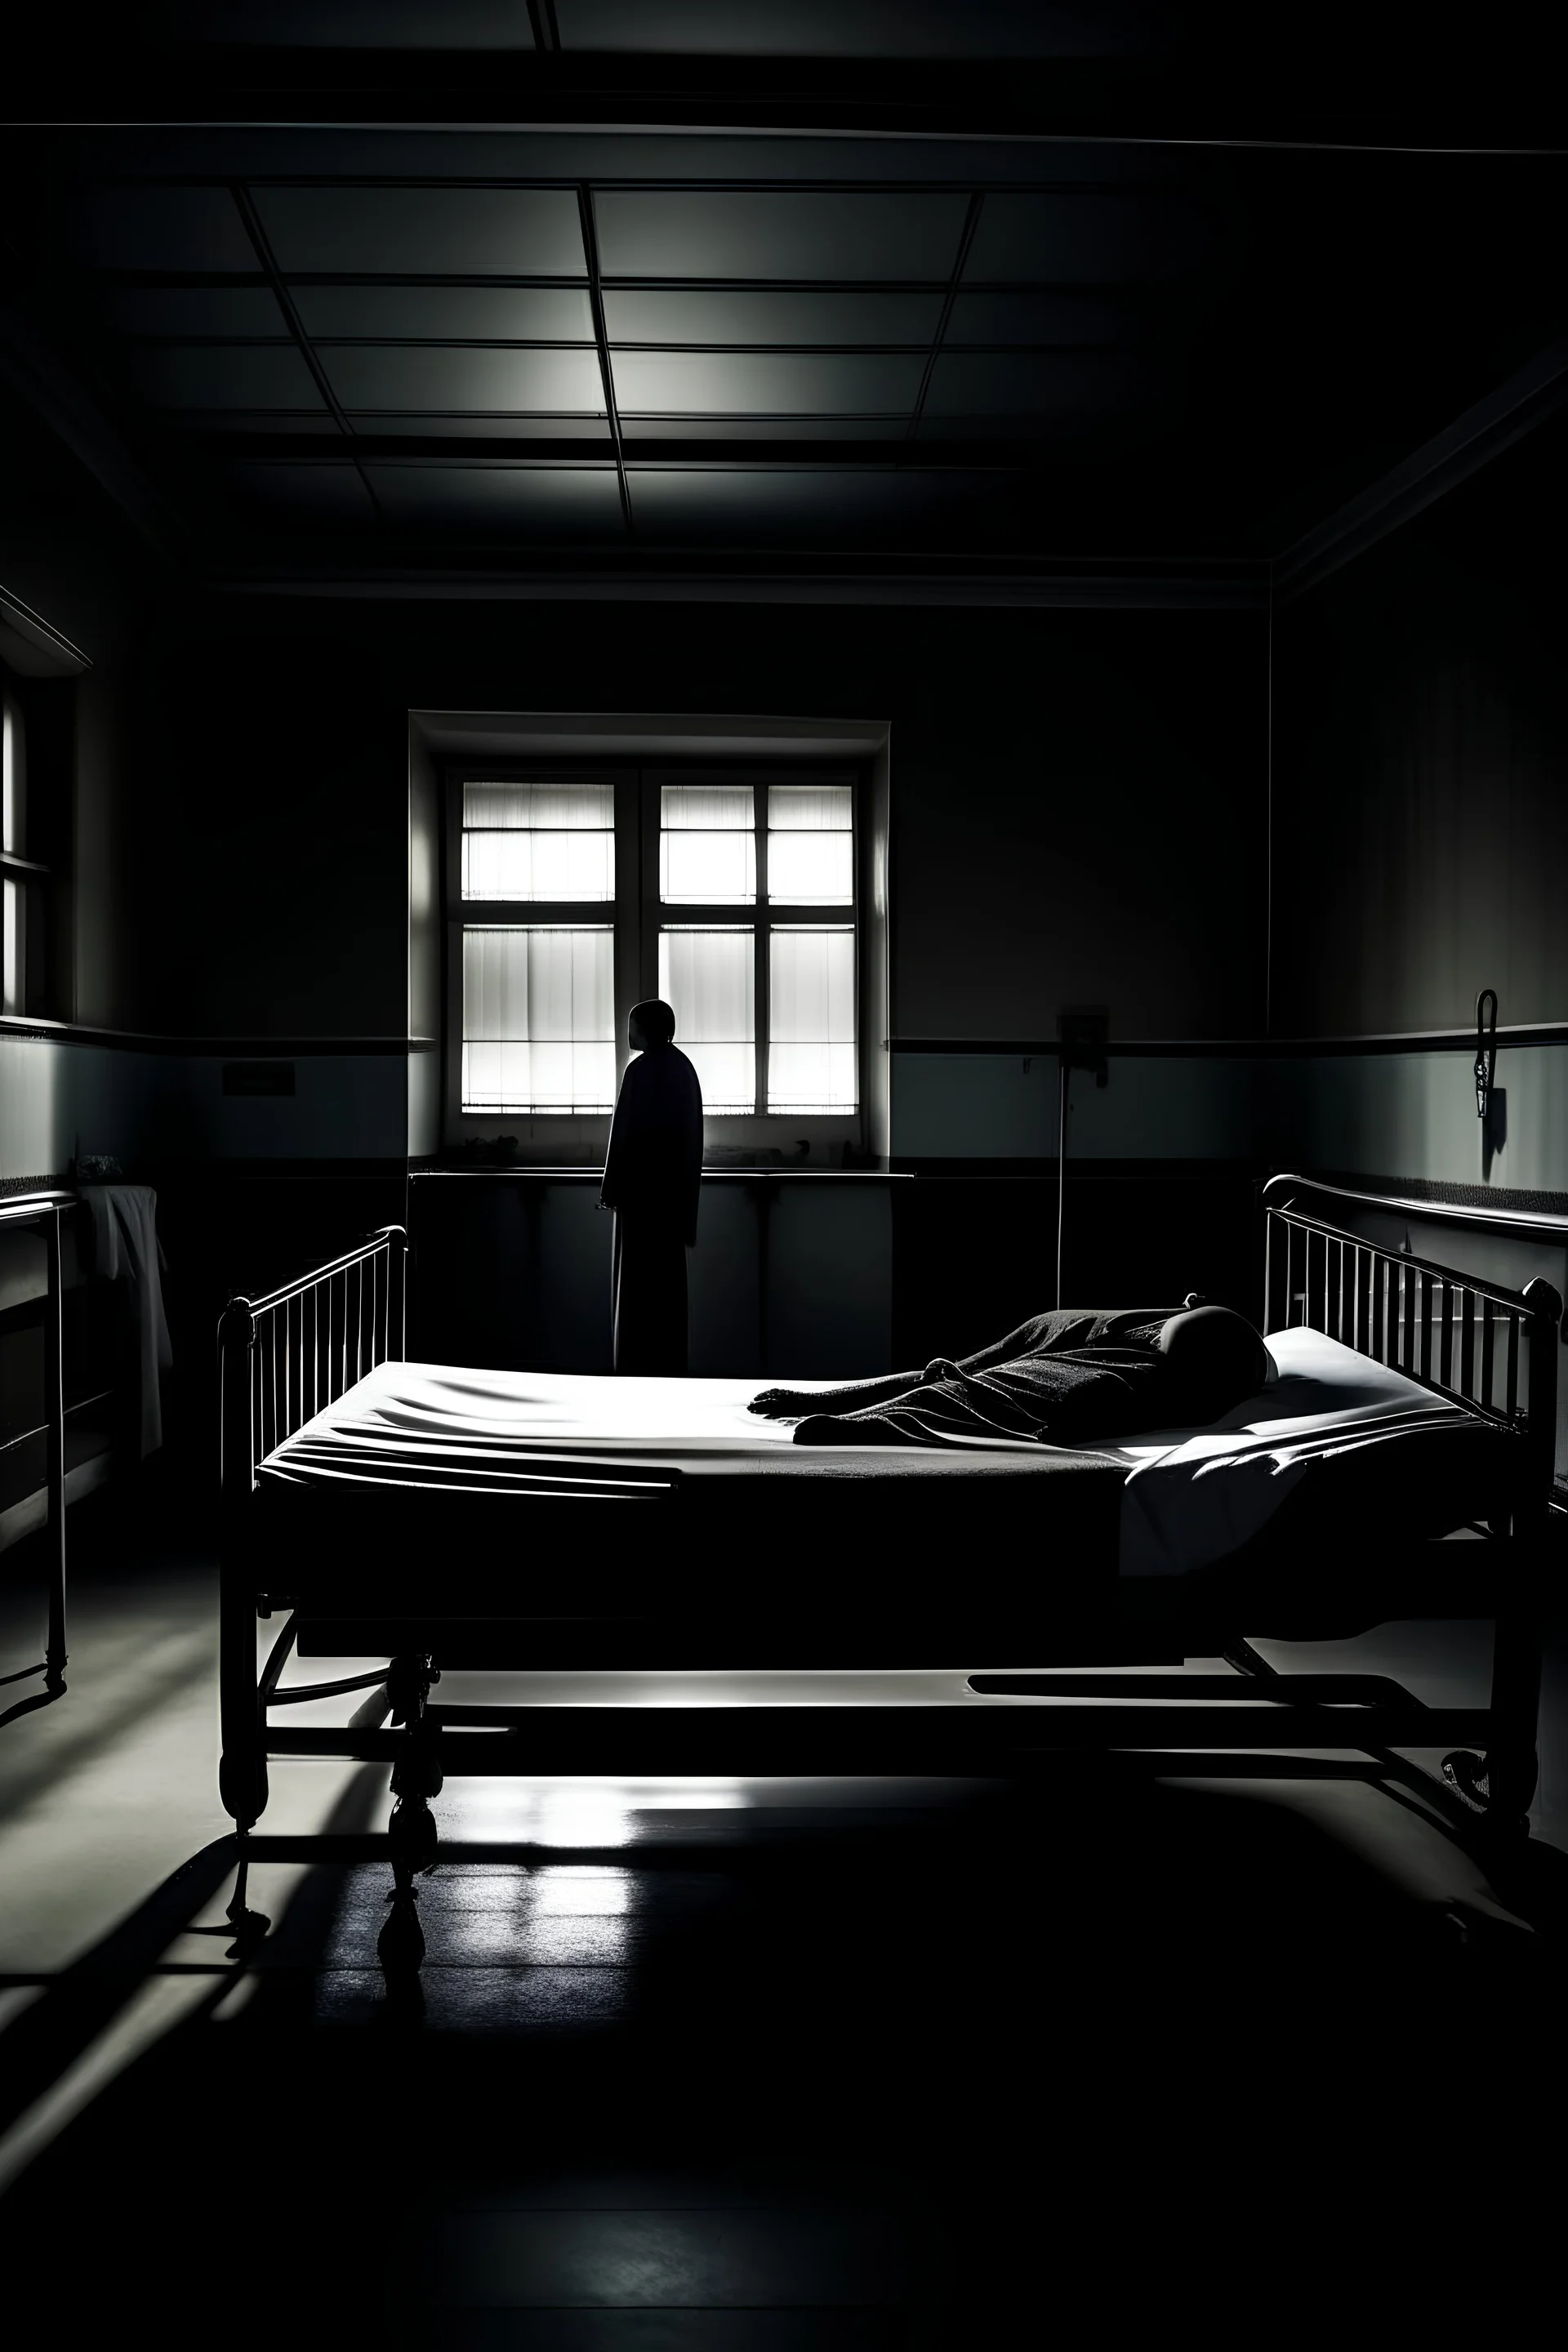 hospital bed dark country with a man without face lying in it